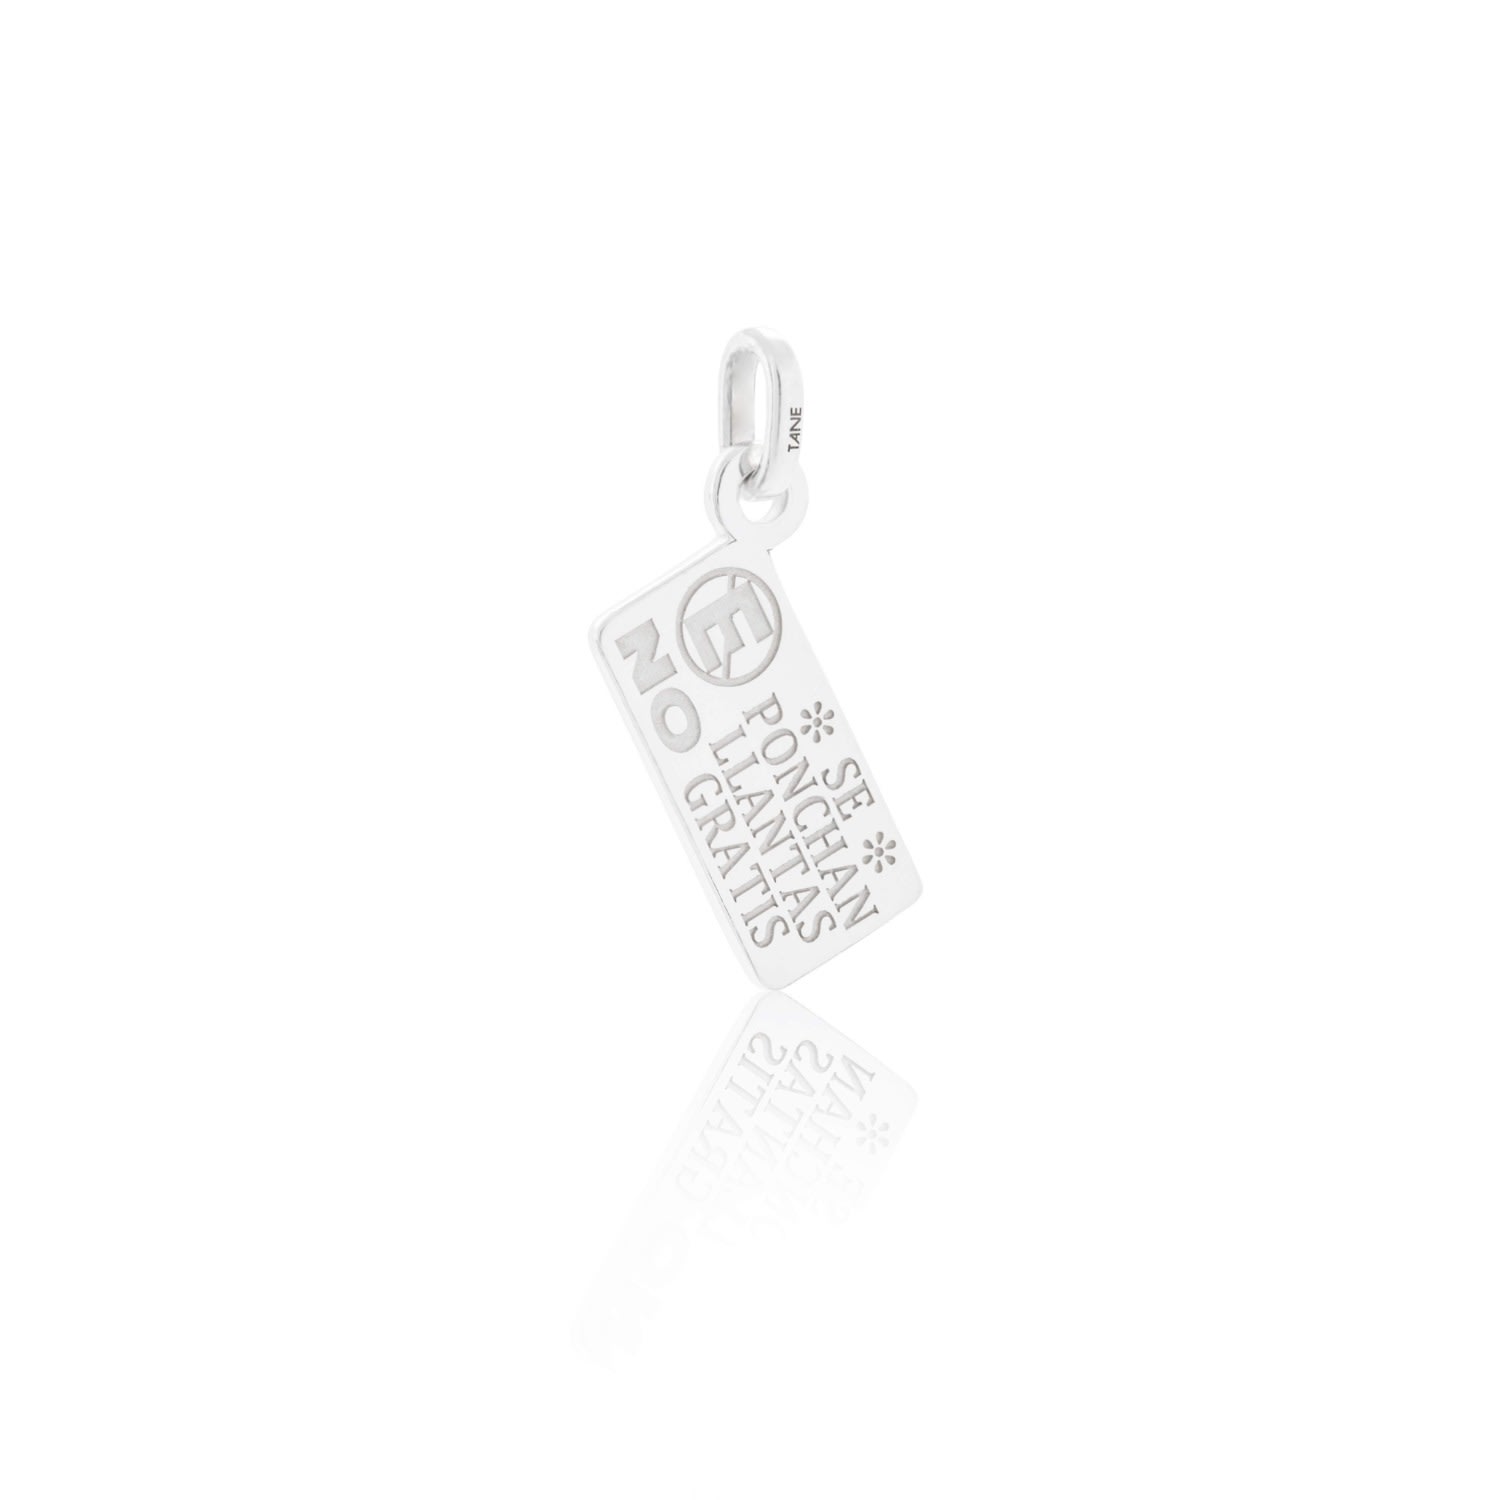 Women’s Exquisitely Detailed Se Ponchan Charm Handmade In Sterling Silver Tane Mexico 1942